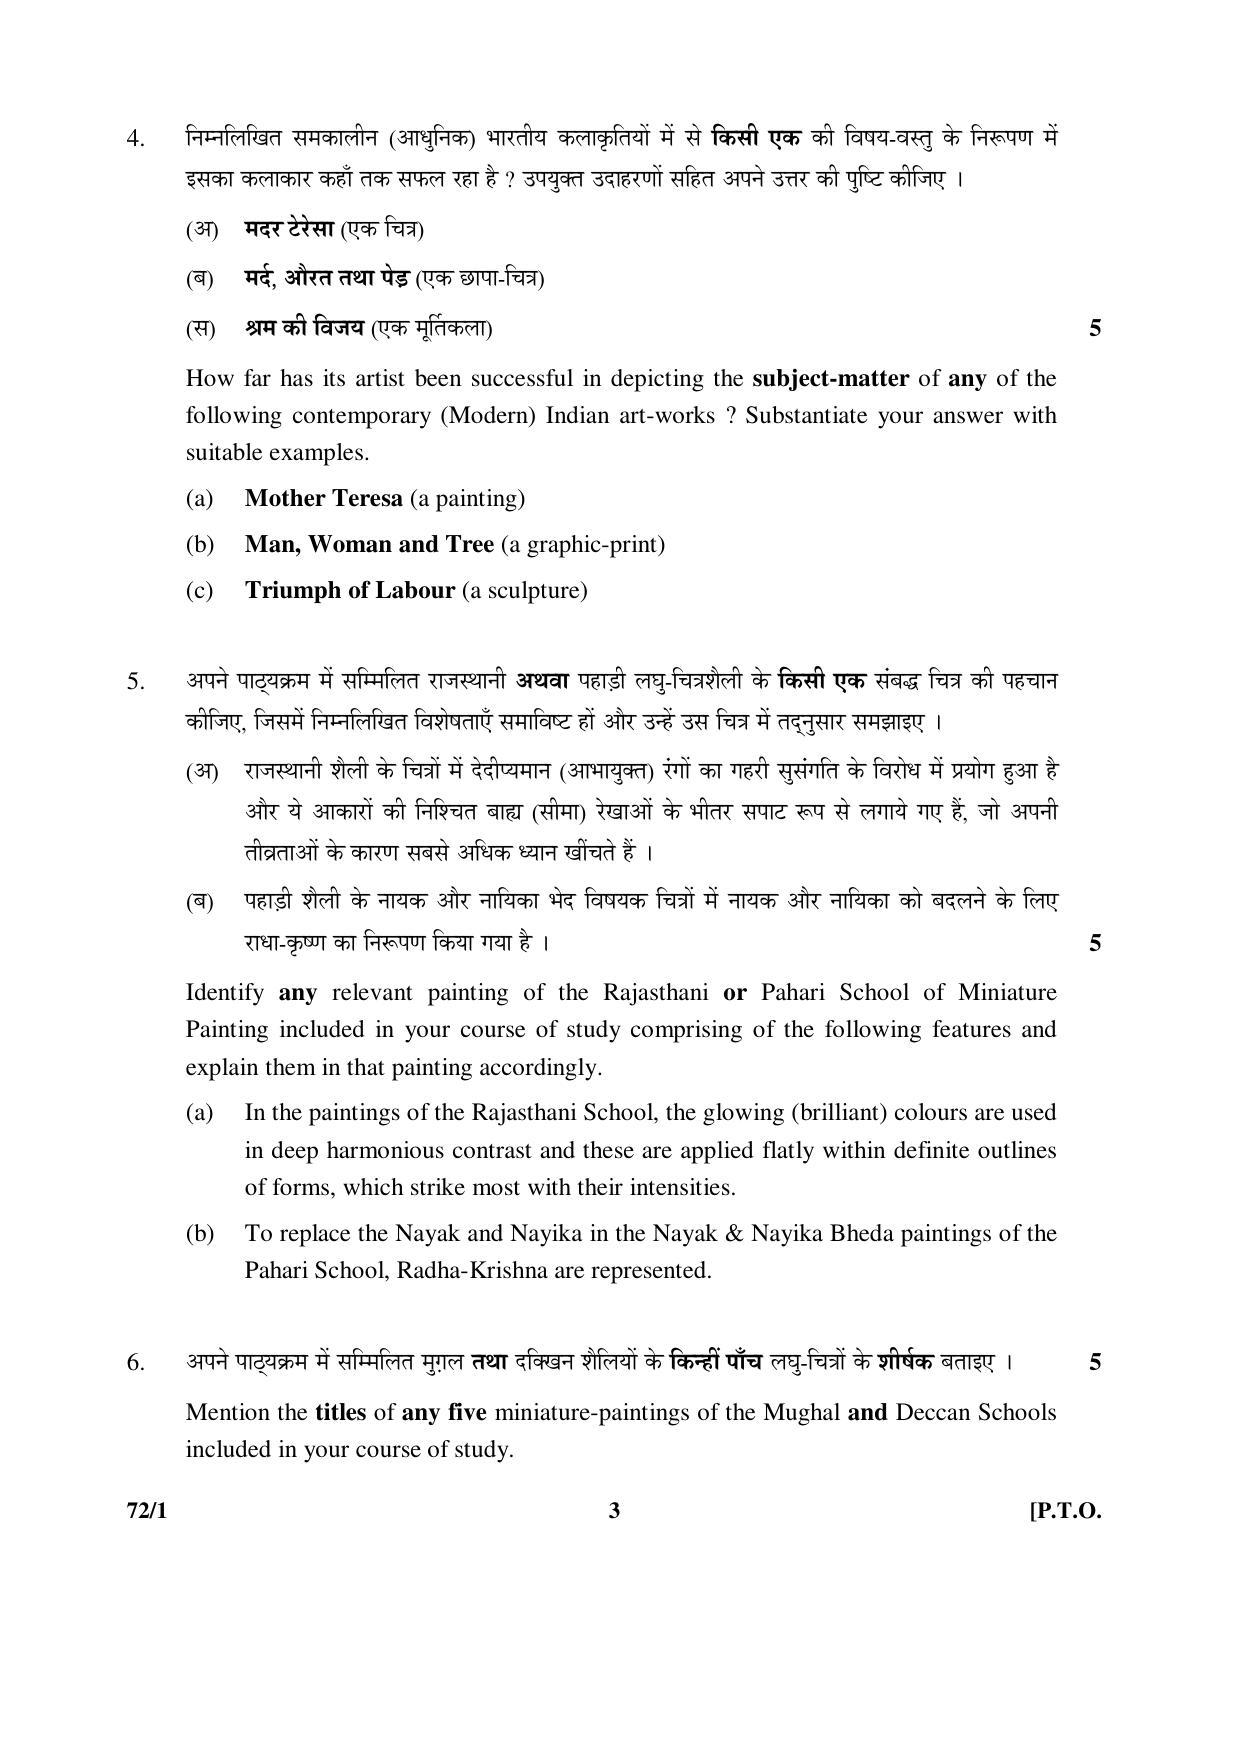 CBSE Class 12 72-1 COMMERCIAL ART (Theory) 2016 Question Paper - Page 3